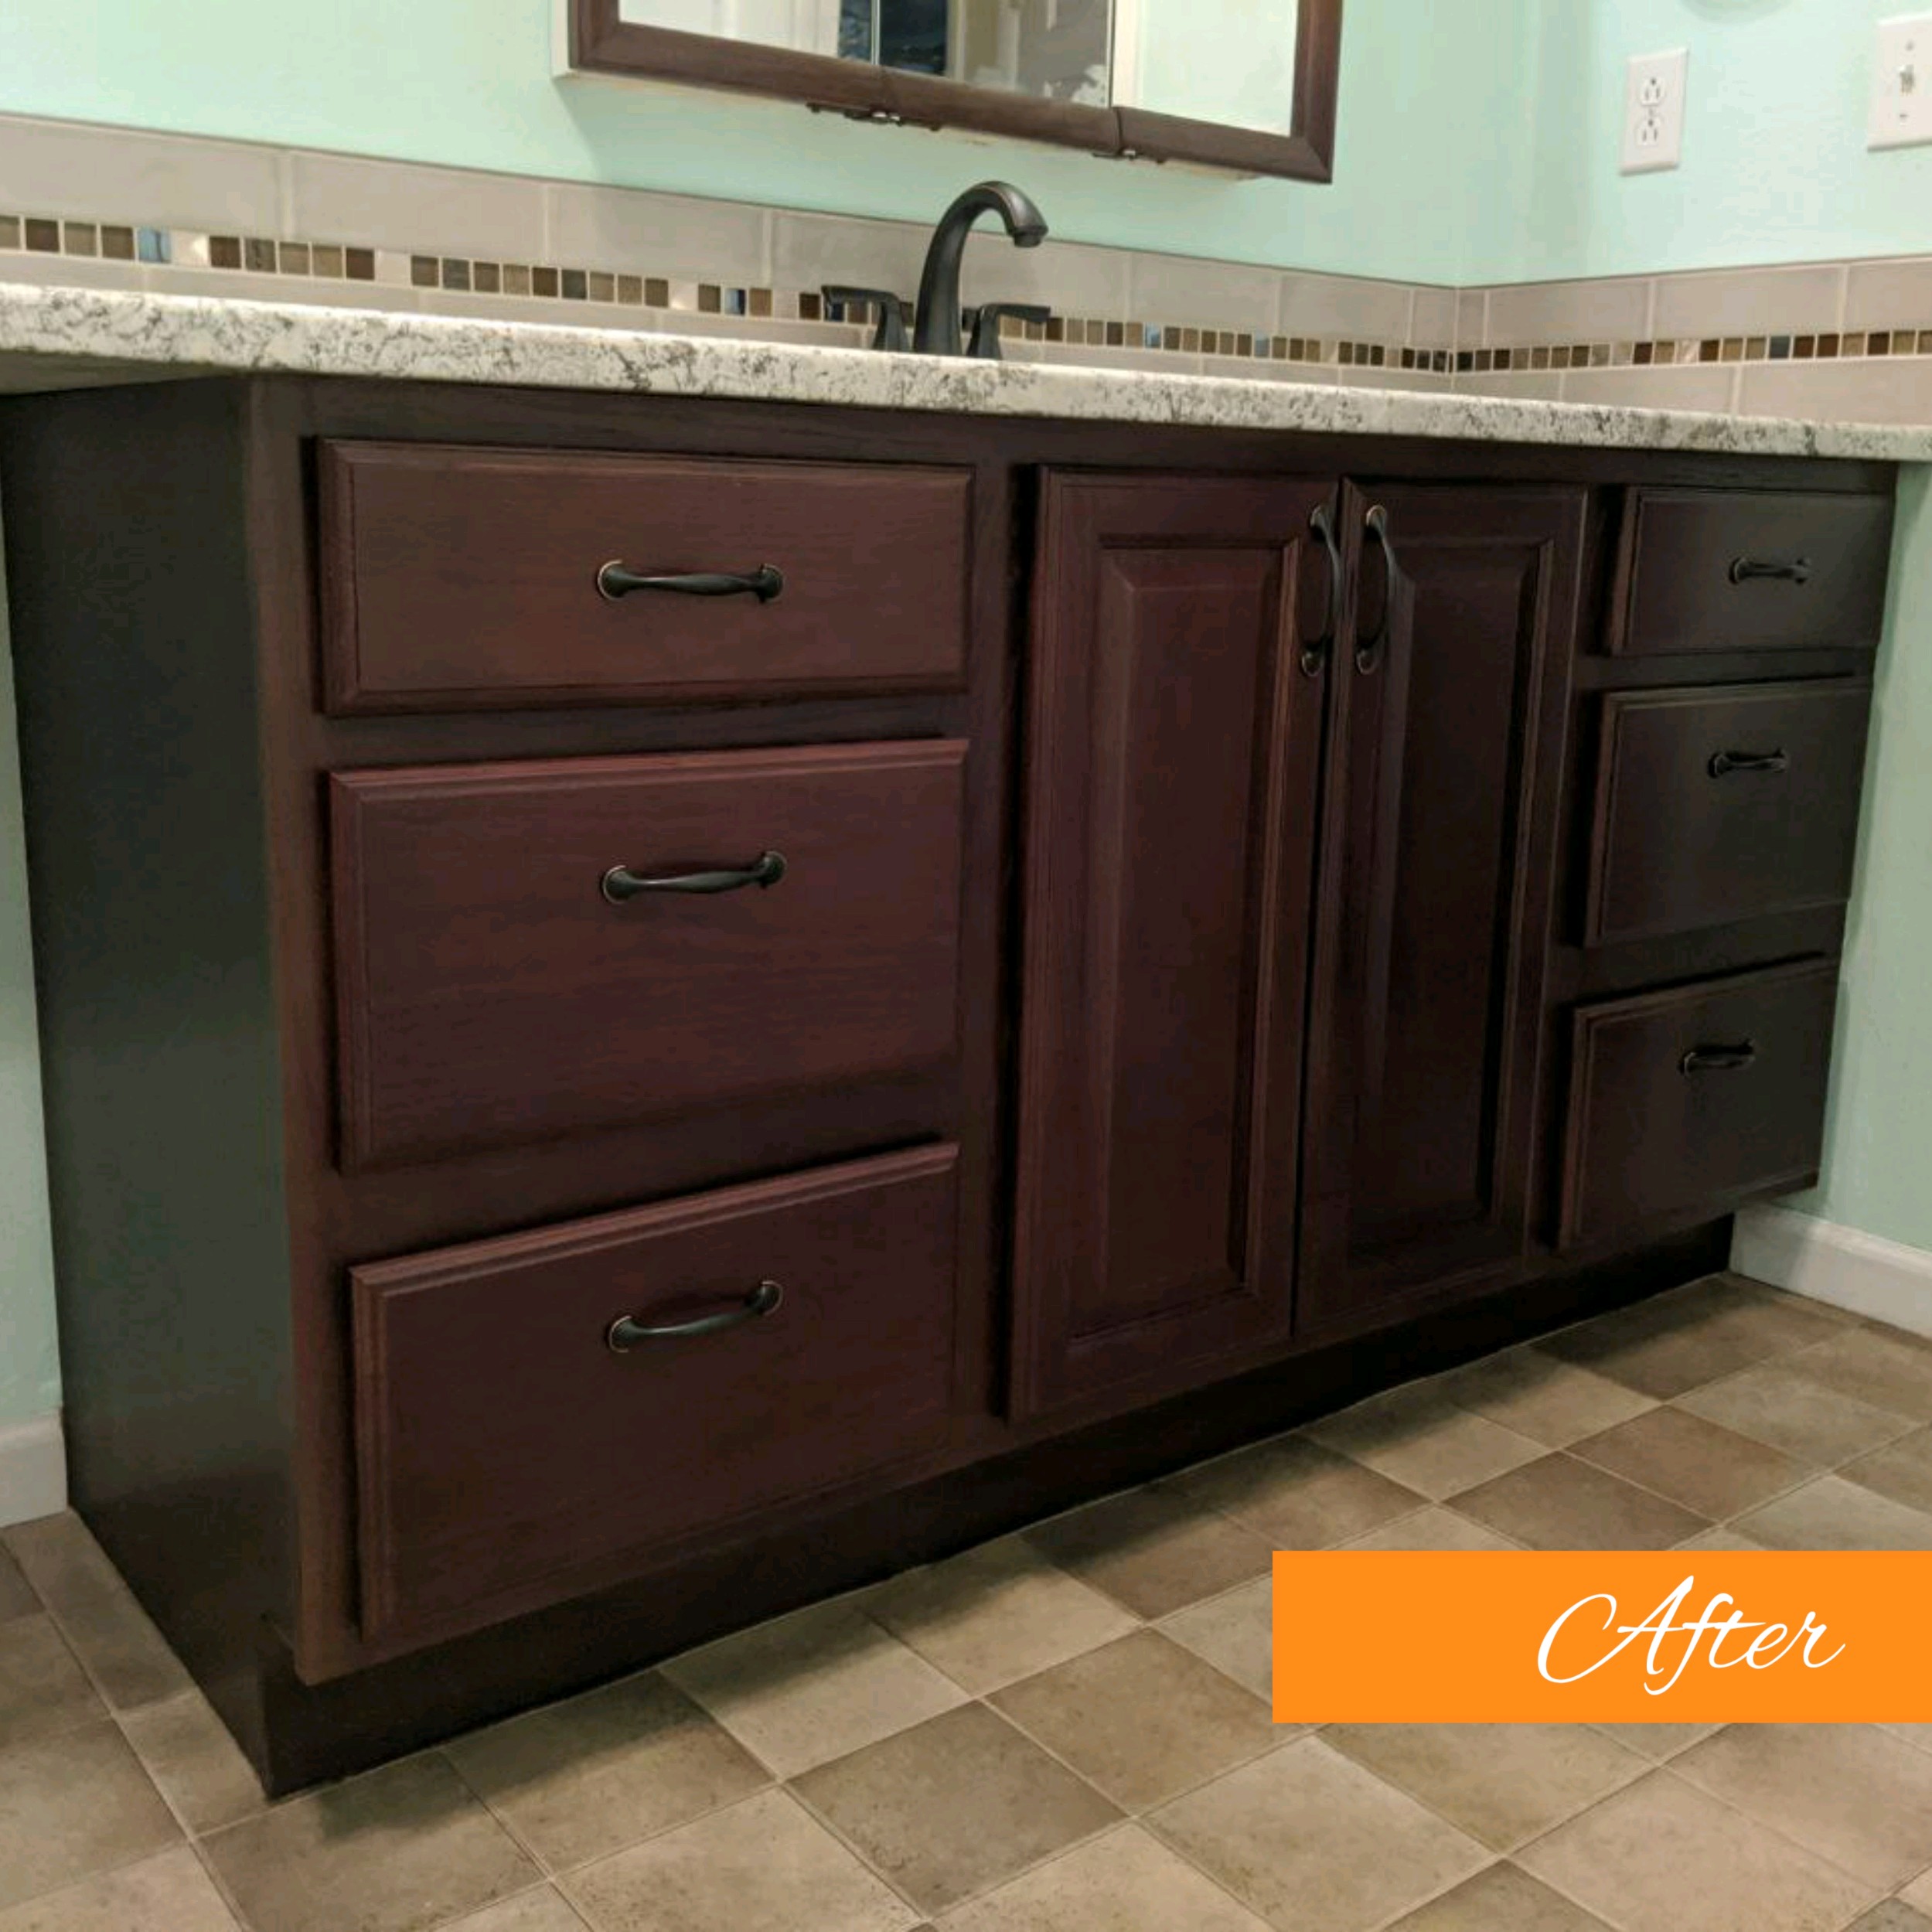 After-Before and after of a cabinet door replacement project in a Boise bathroom